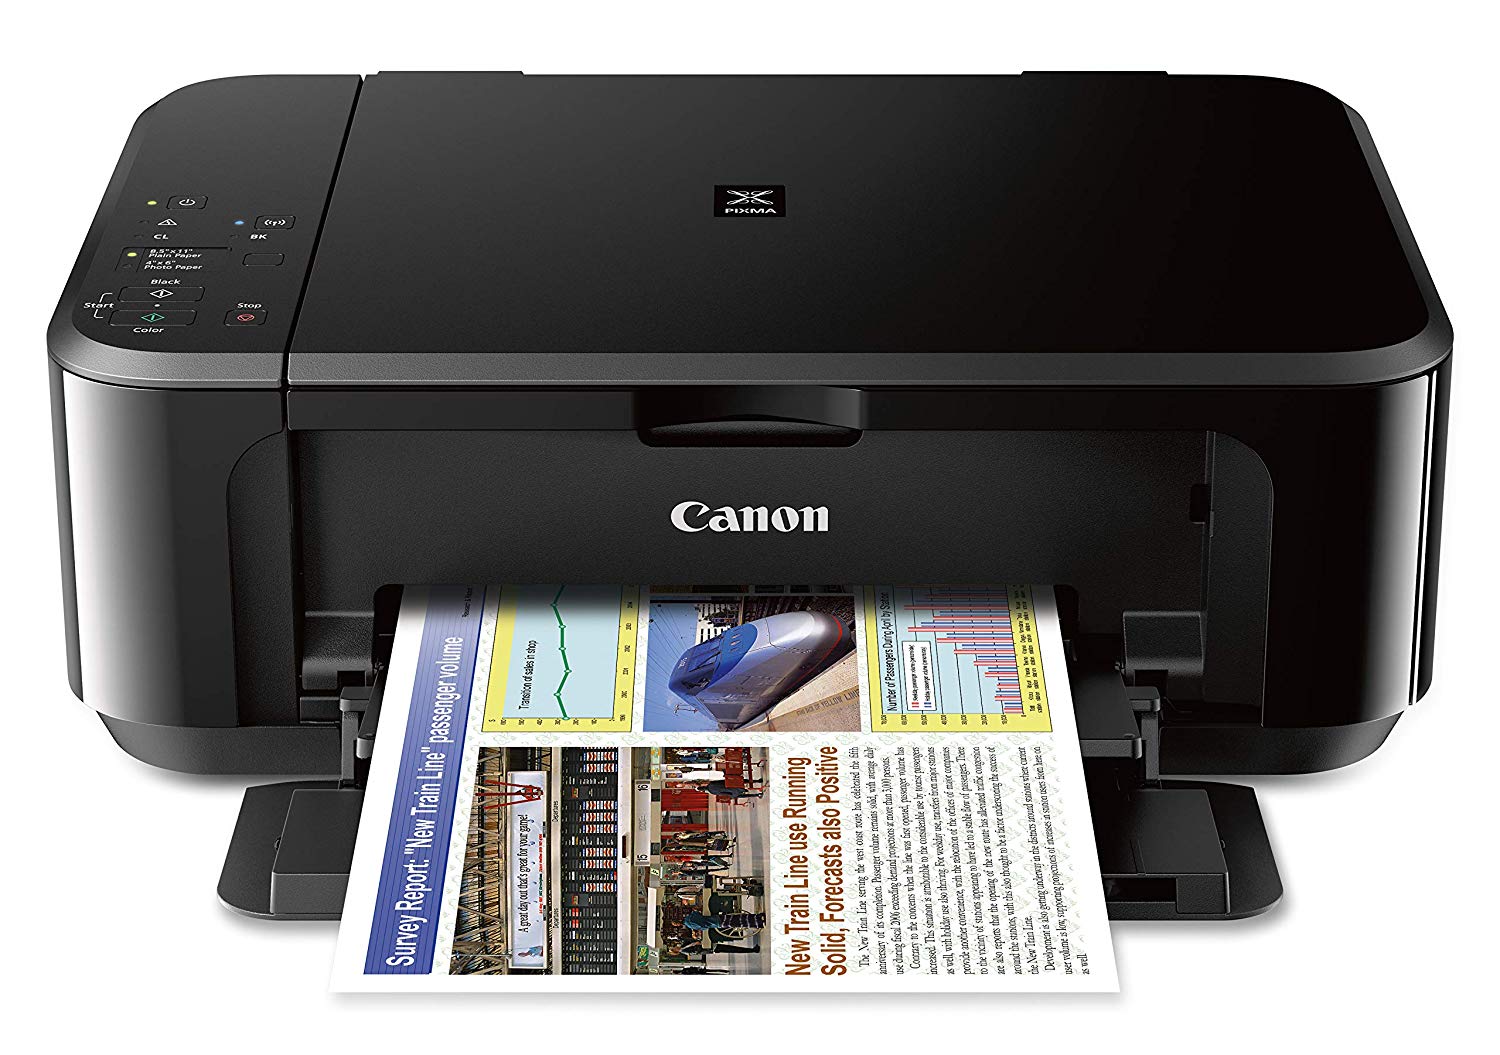 Canon PIXMA MG3620 Wireless All-in-One Color Inkjet Photo Printer, Black - image 2 of 7